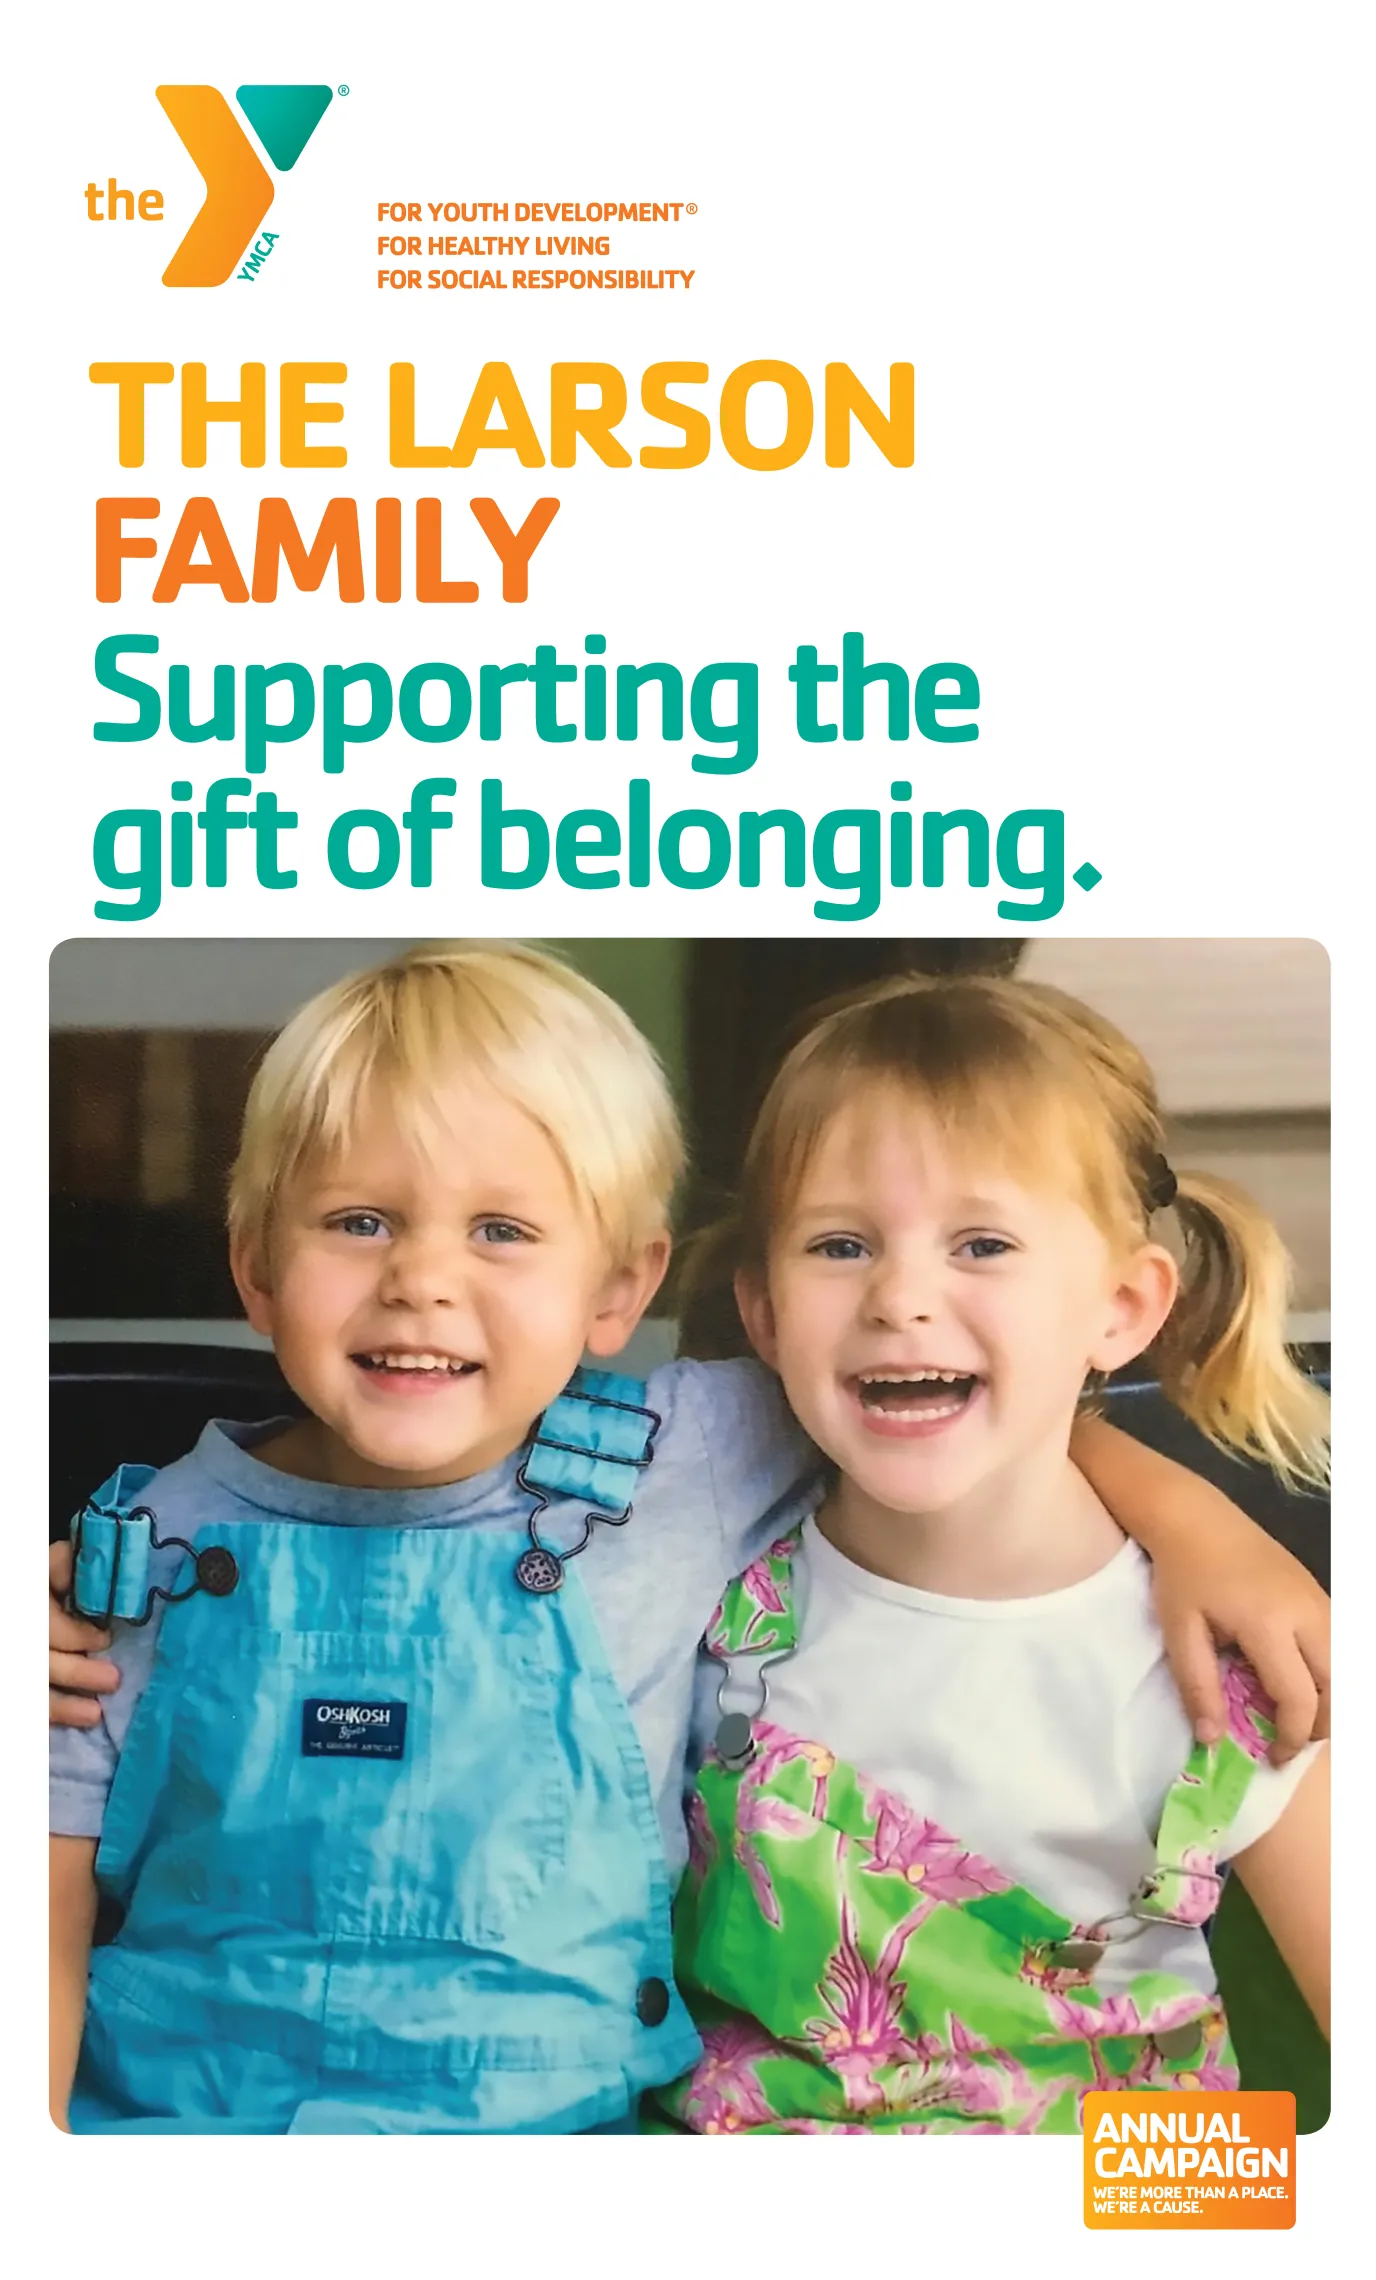 "The Larson Family: supporting the gift of belonging." With an image of an adorable five year old brother/sister duo wearing overalls, both smiling